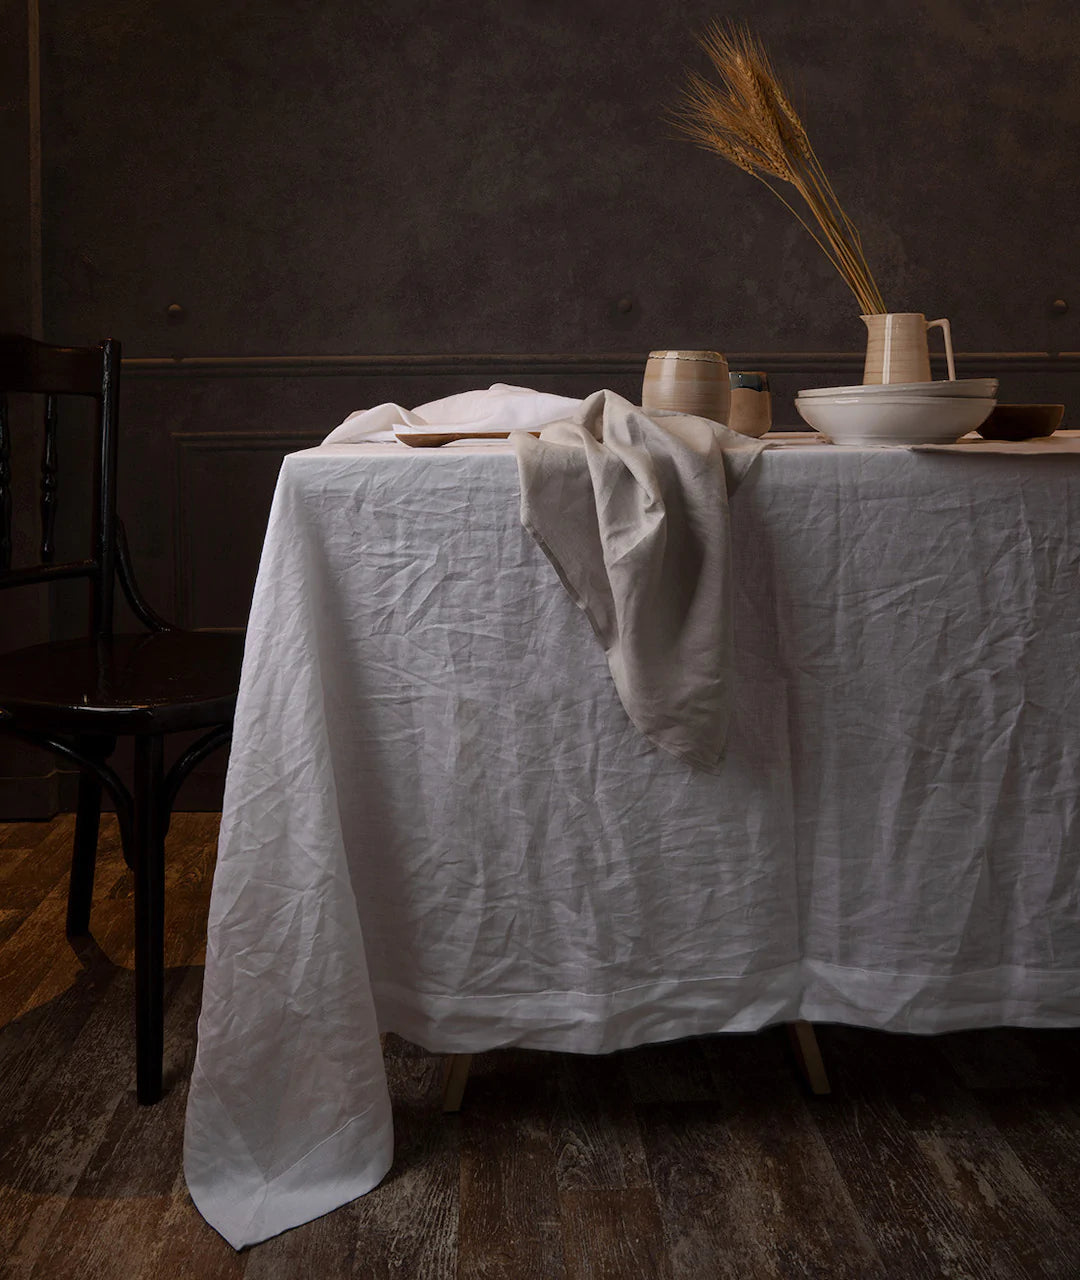 Linen: The Sustainable Fabric You Didn't Know Your Home Needed